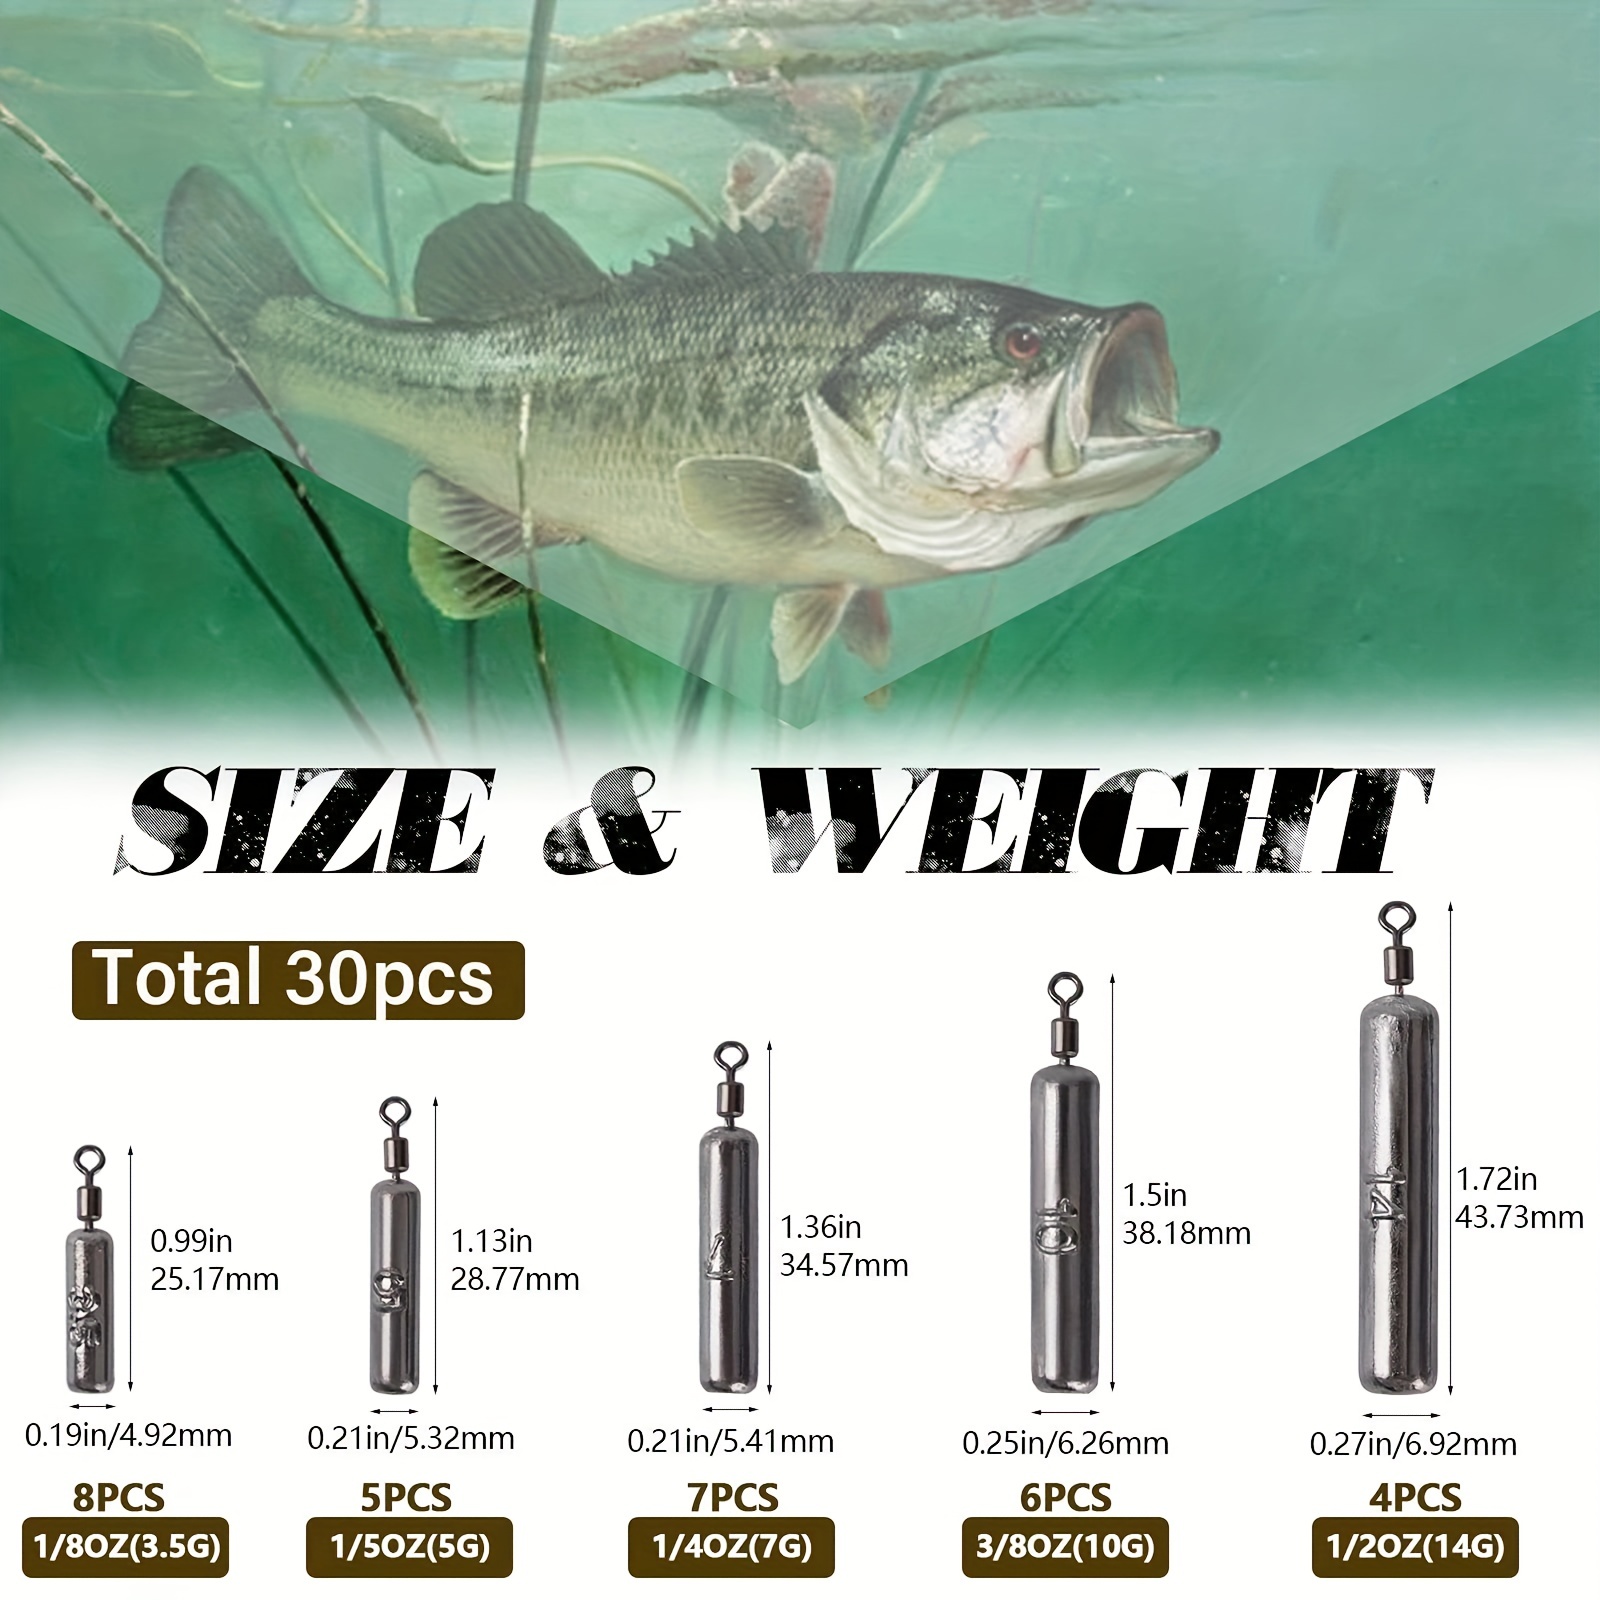 Drop Shot Rig Kit Bass Fishing 3 Packs for Bass Fishing Lures Crappie Lures  Drop Shot Hooks Jigs Heads (Short Styles, 3/16oz, 5g), Bait Rigs -   Canada